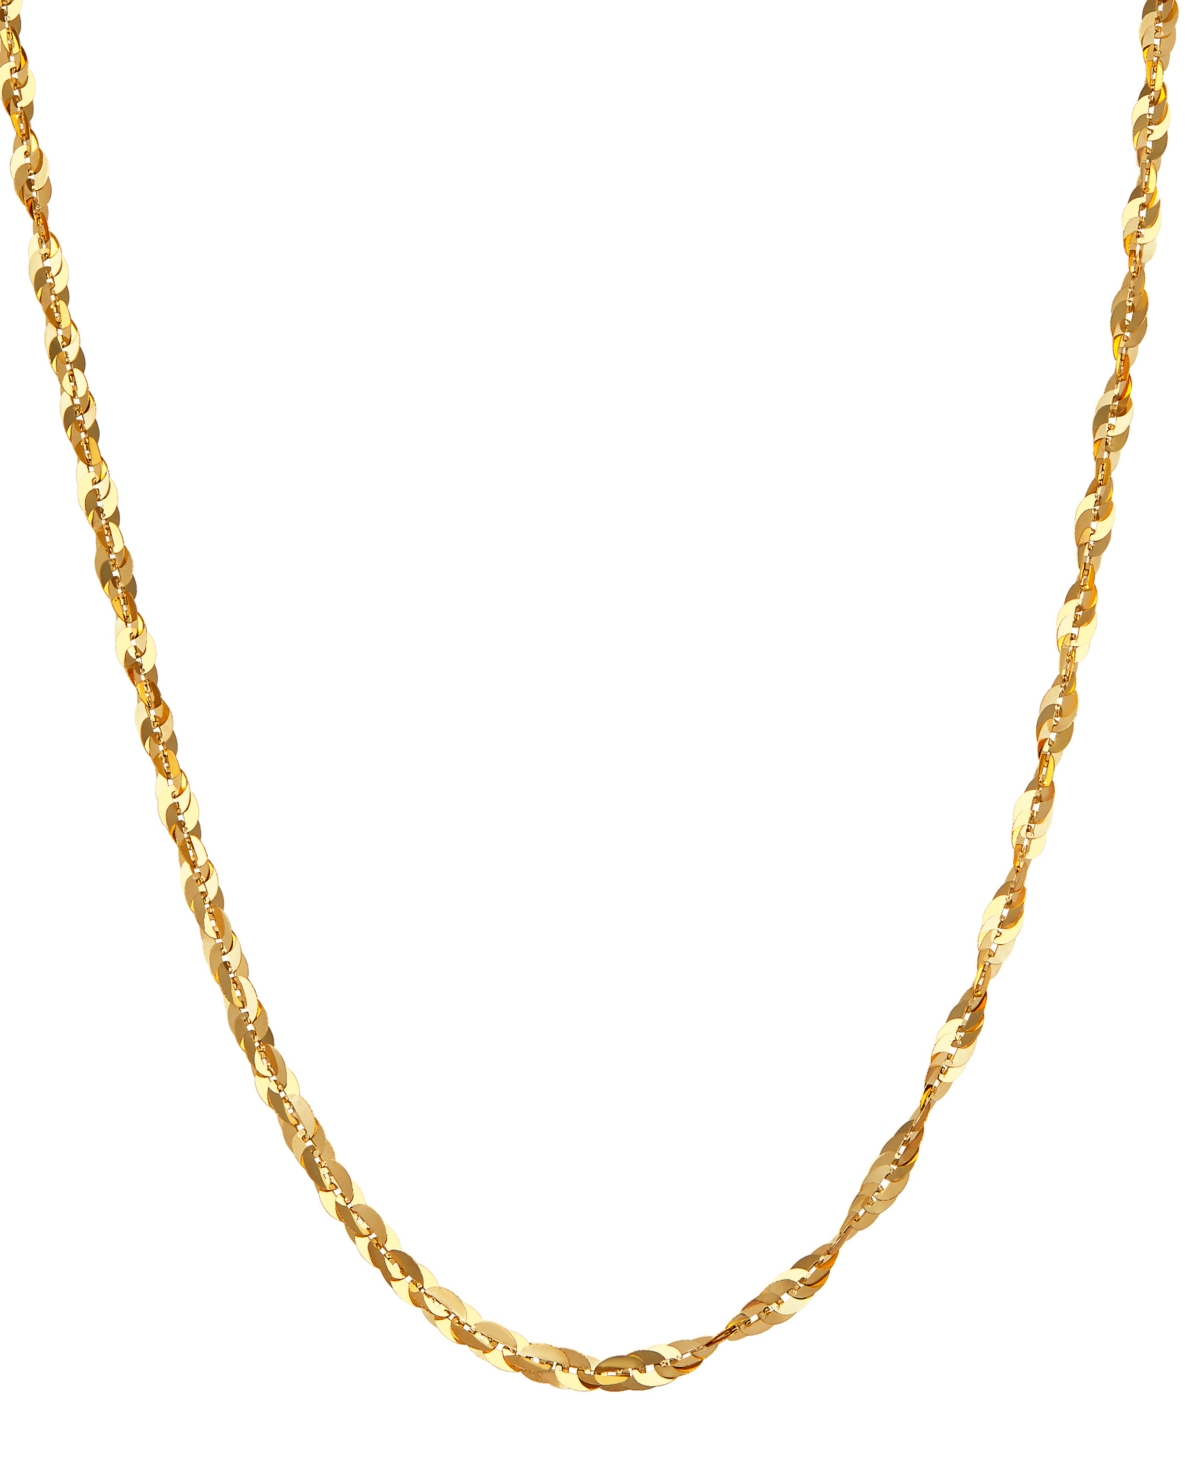 Polished Twist Link 18" Chain Necklace in 14k Gold - Gold